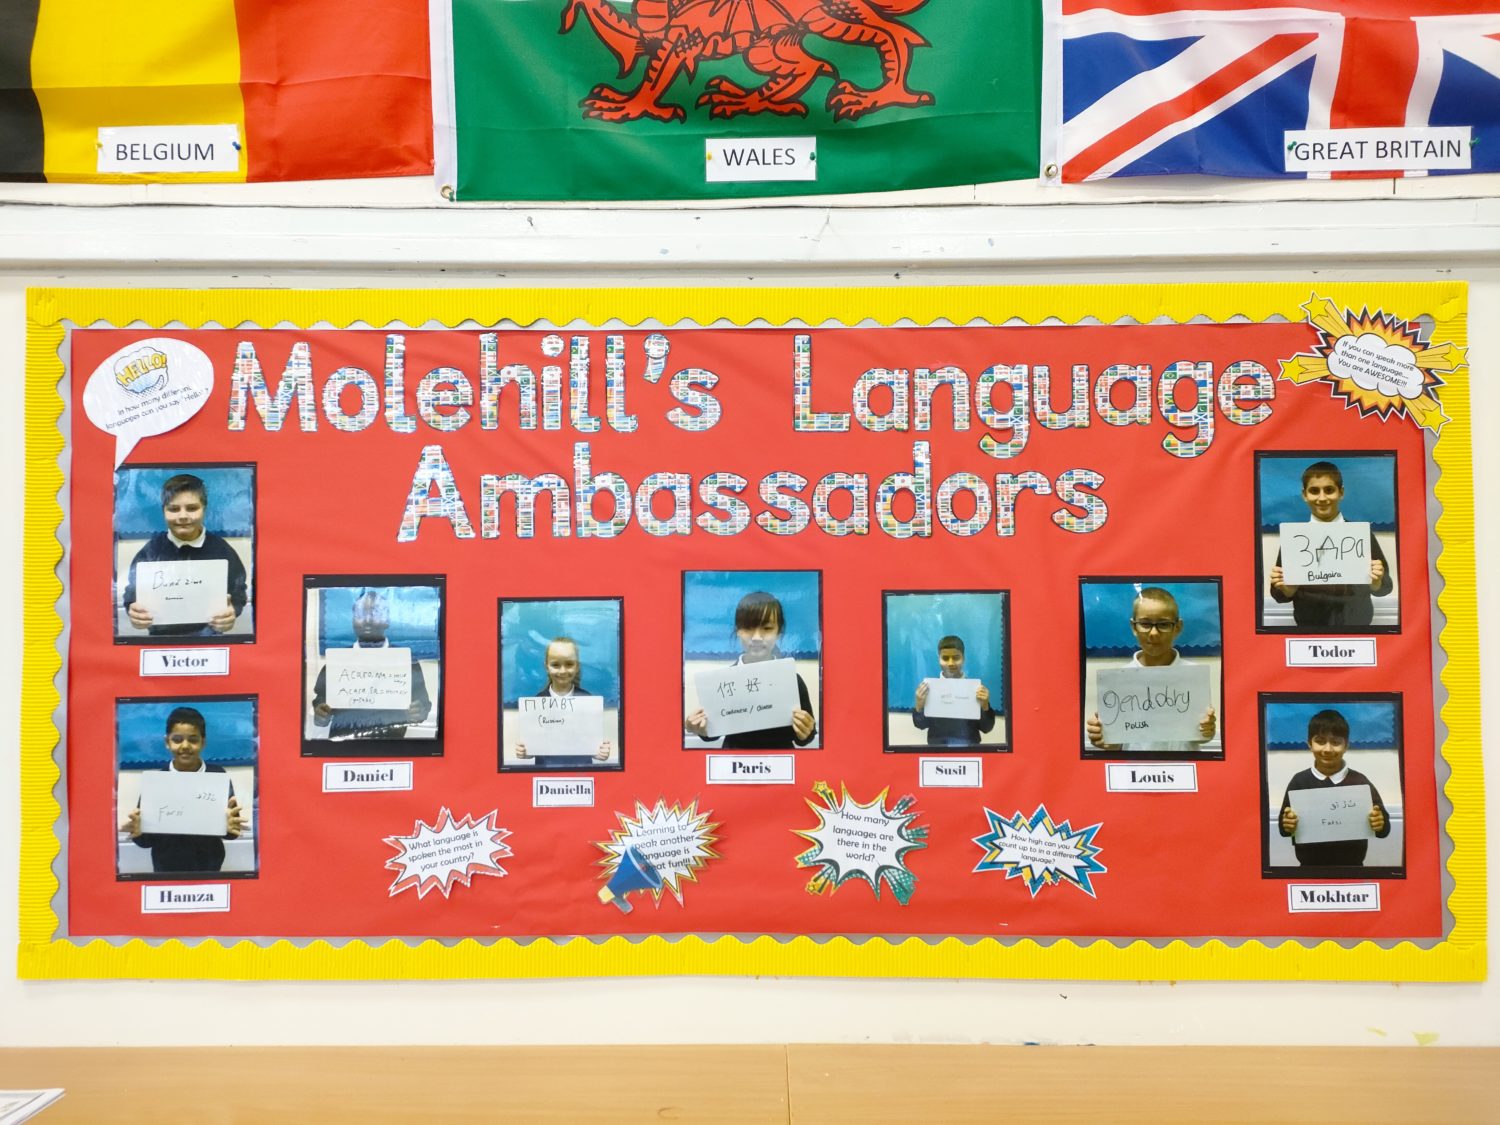 Molehill's Language Ambassadors. A display in a classroom showing names and faces of the school's Language Ambassadors.